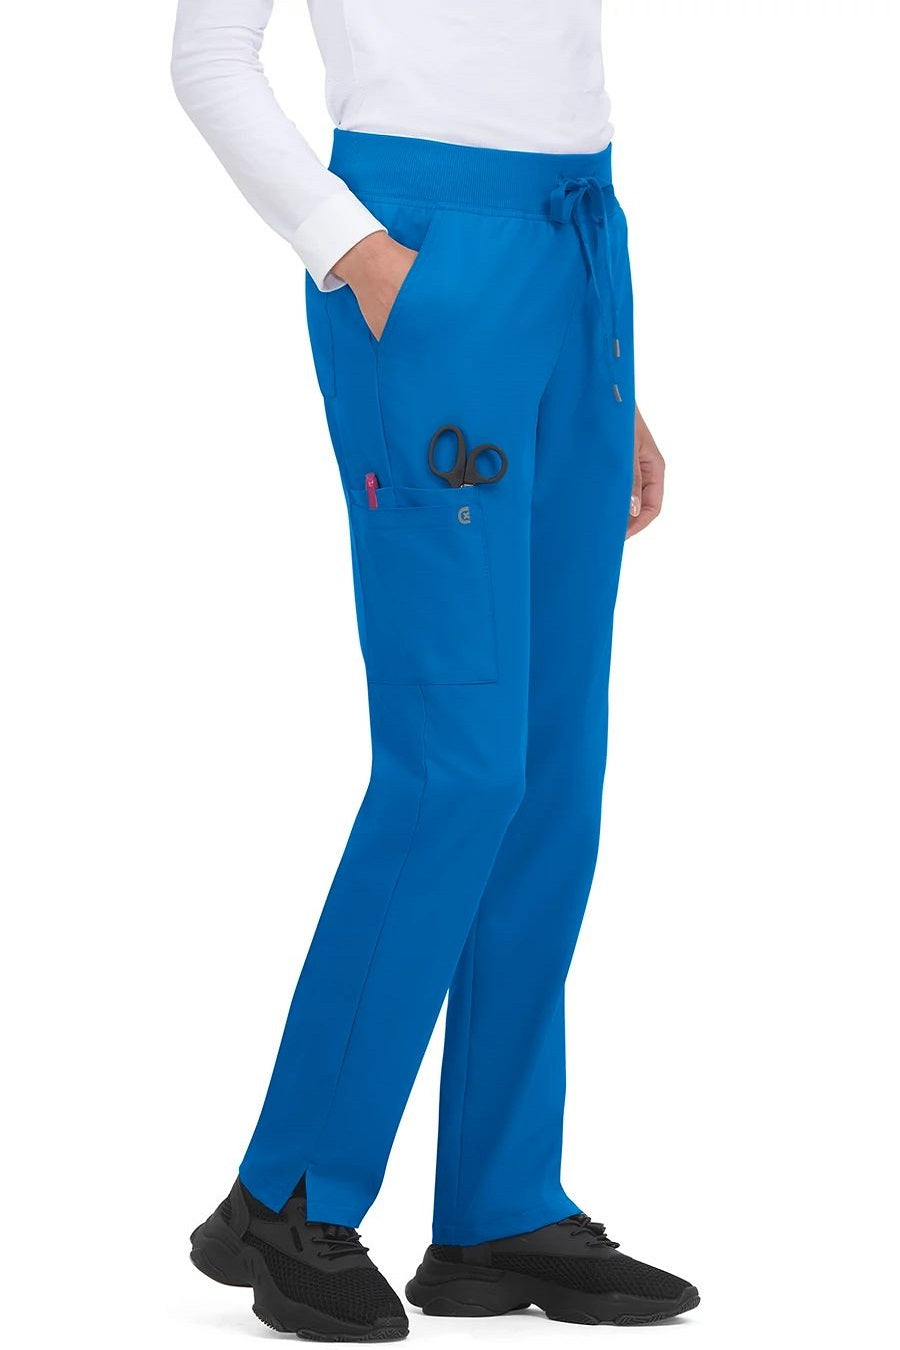 koi Scrub Pants Cureology Atria in Tall Royal at Parker's Clothing and Shoes.